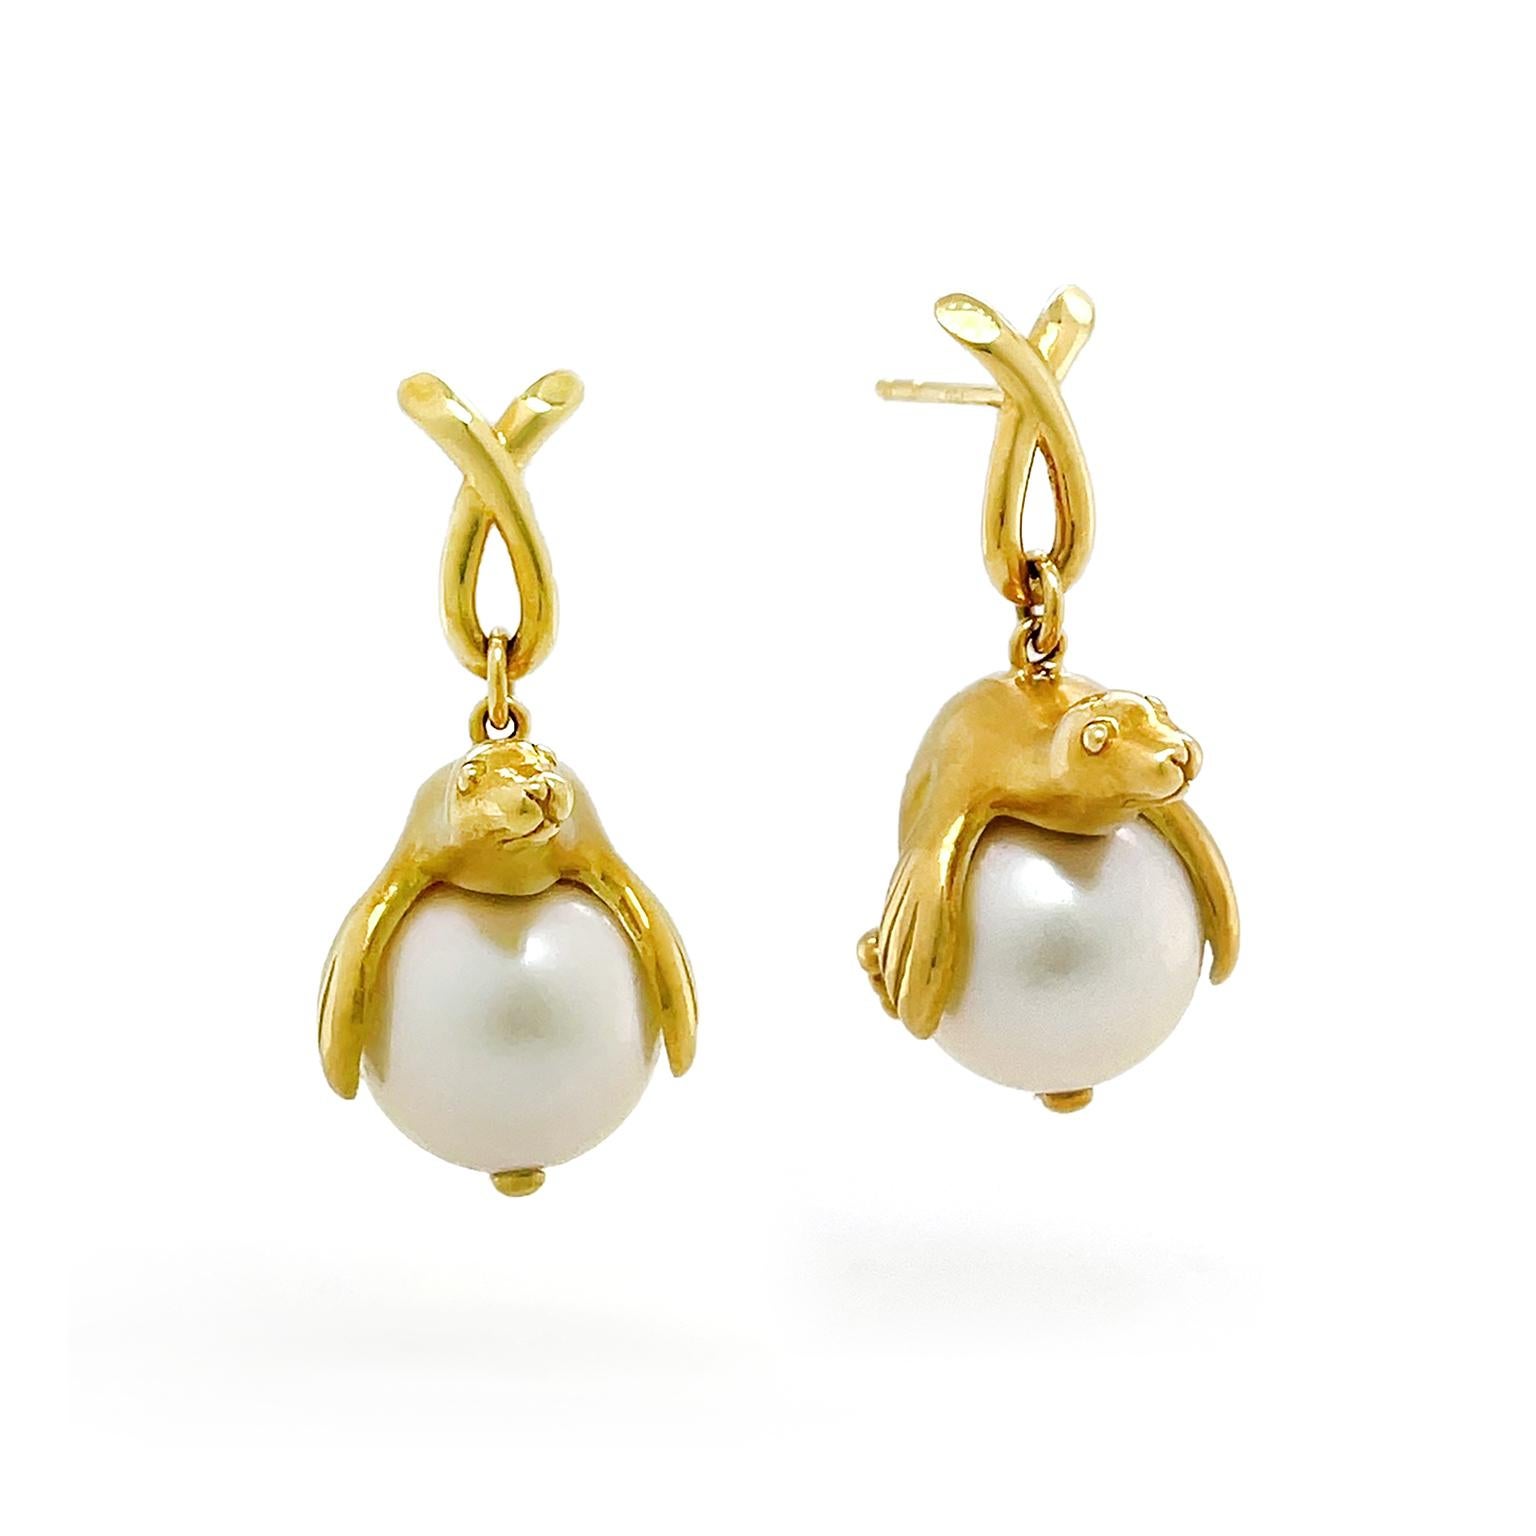 Sea lions give an imaginative touch to these pearl drop earrings. Beginning with a loop formed by an overlapped strand of 18k yellow gold, this connects to a gold sea lion resting on top of a south sea pearl. Craftsmanship is given to the eyes,